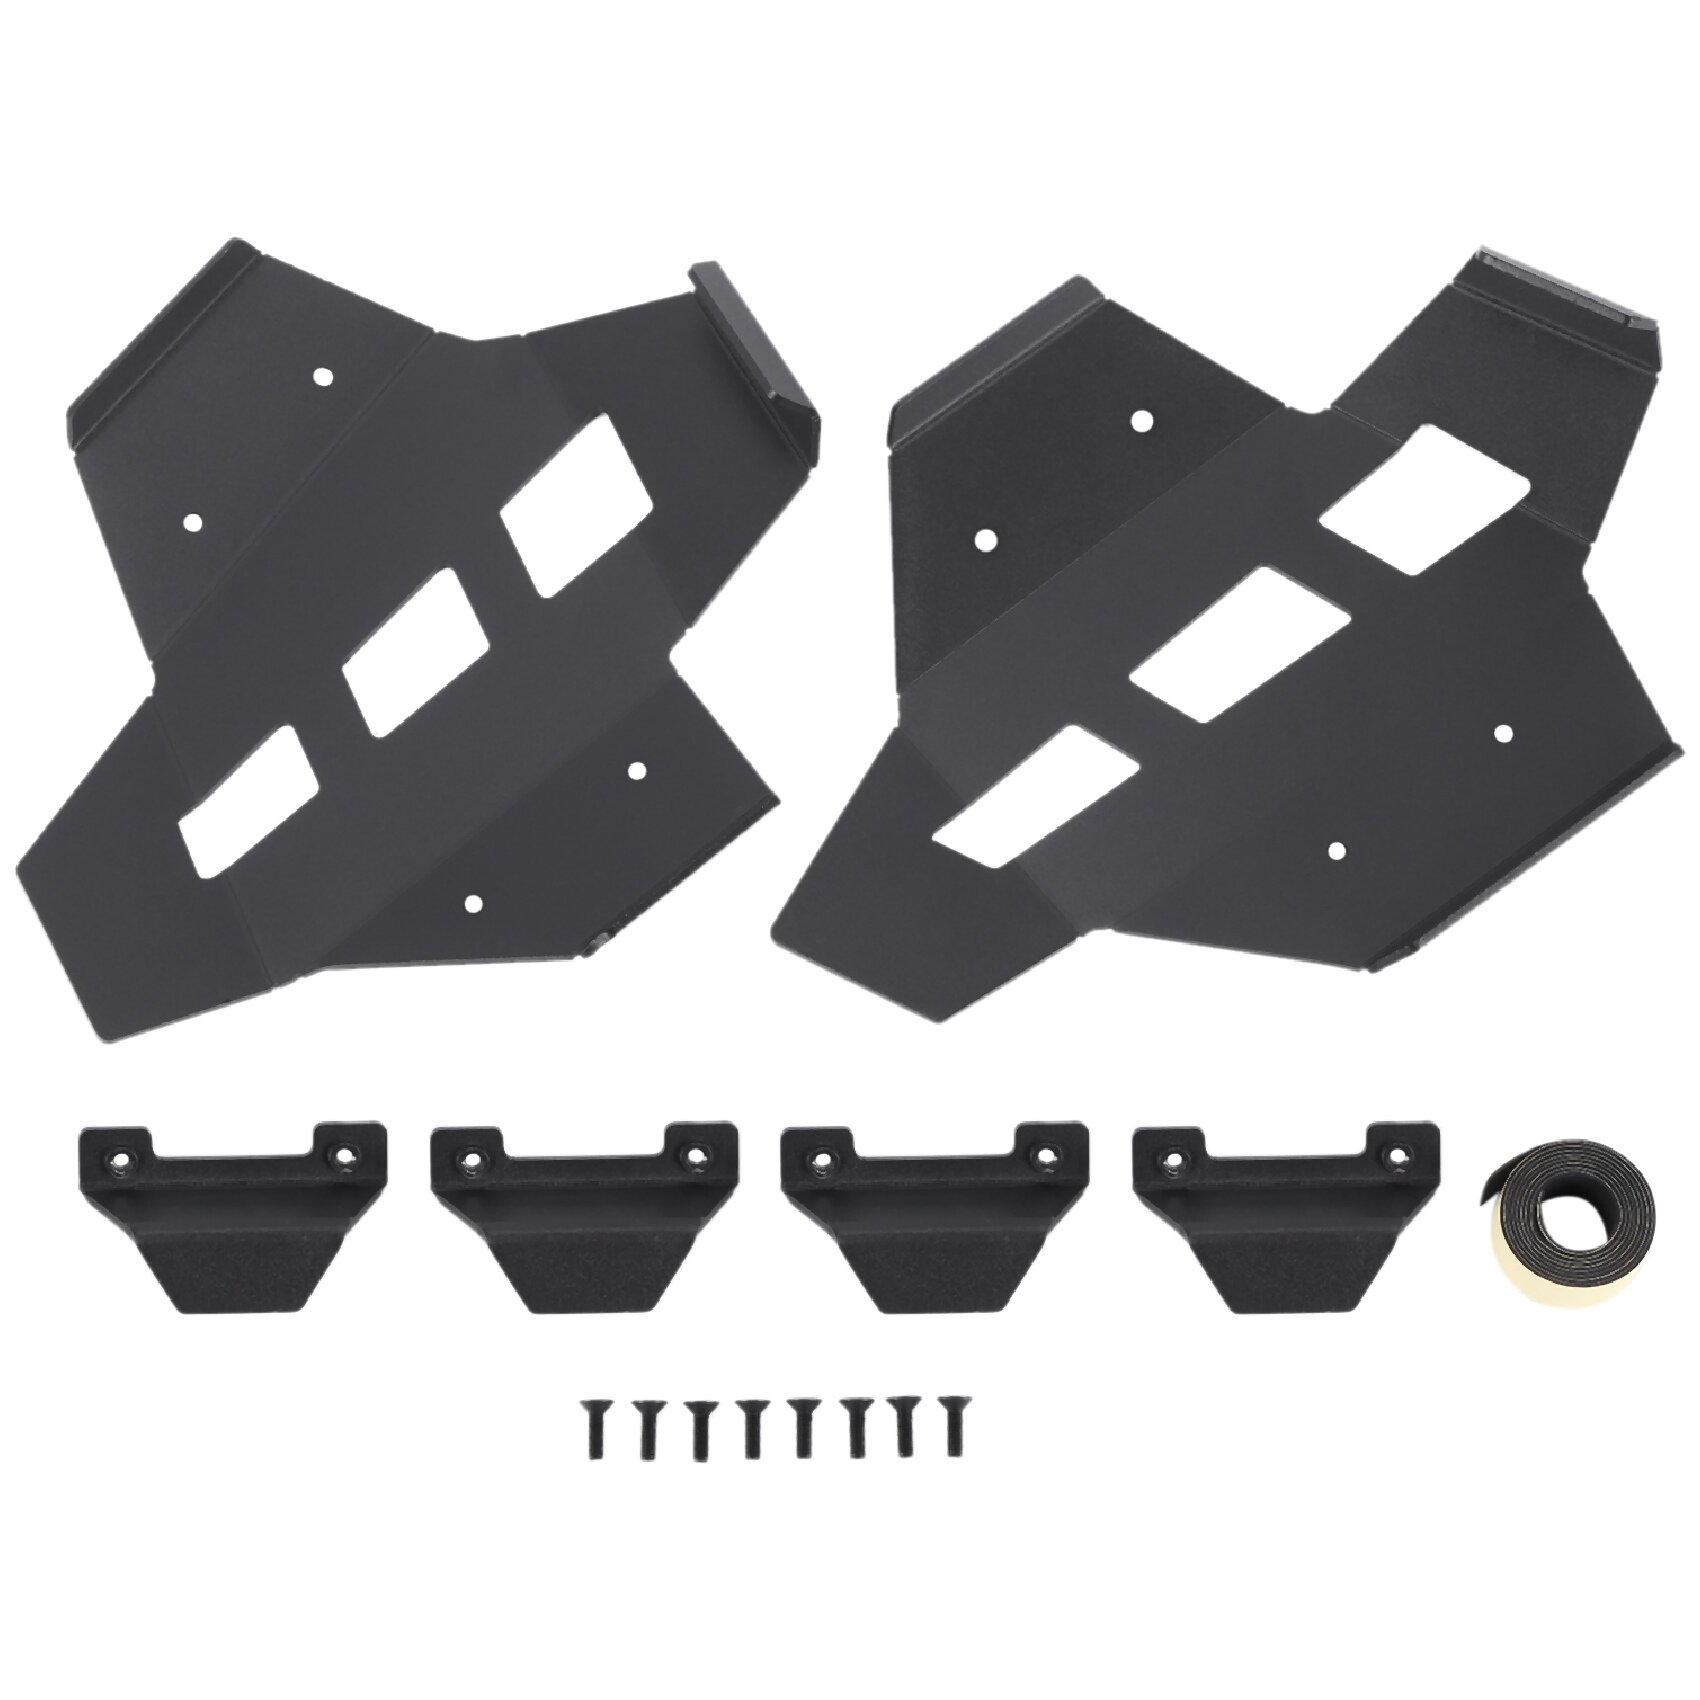 Motorcycle Accessories Cylinder Head Protector Cover For- R 1250 GS/R1250GS